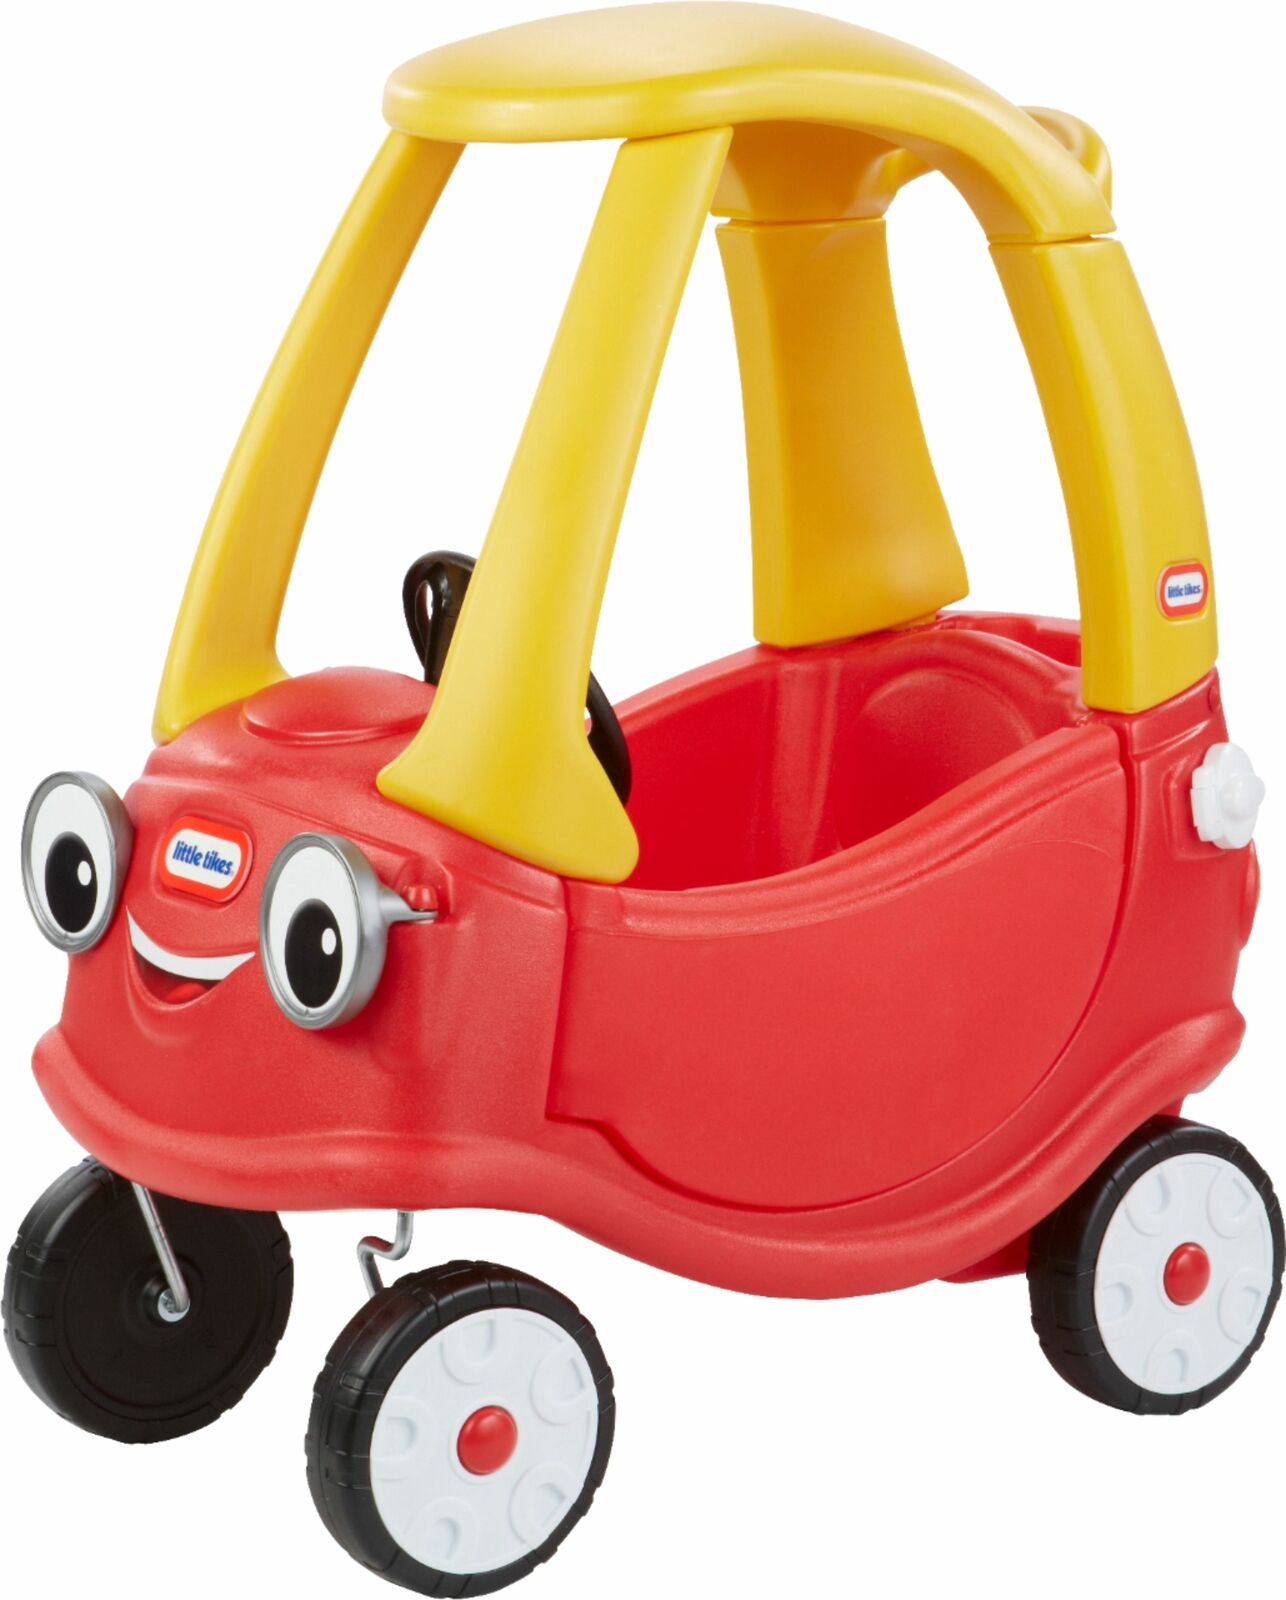 Little Tikes Cozy Coupe Ride On Toy for Toddlers and Kids! - image 5 of 5